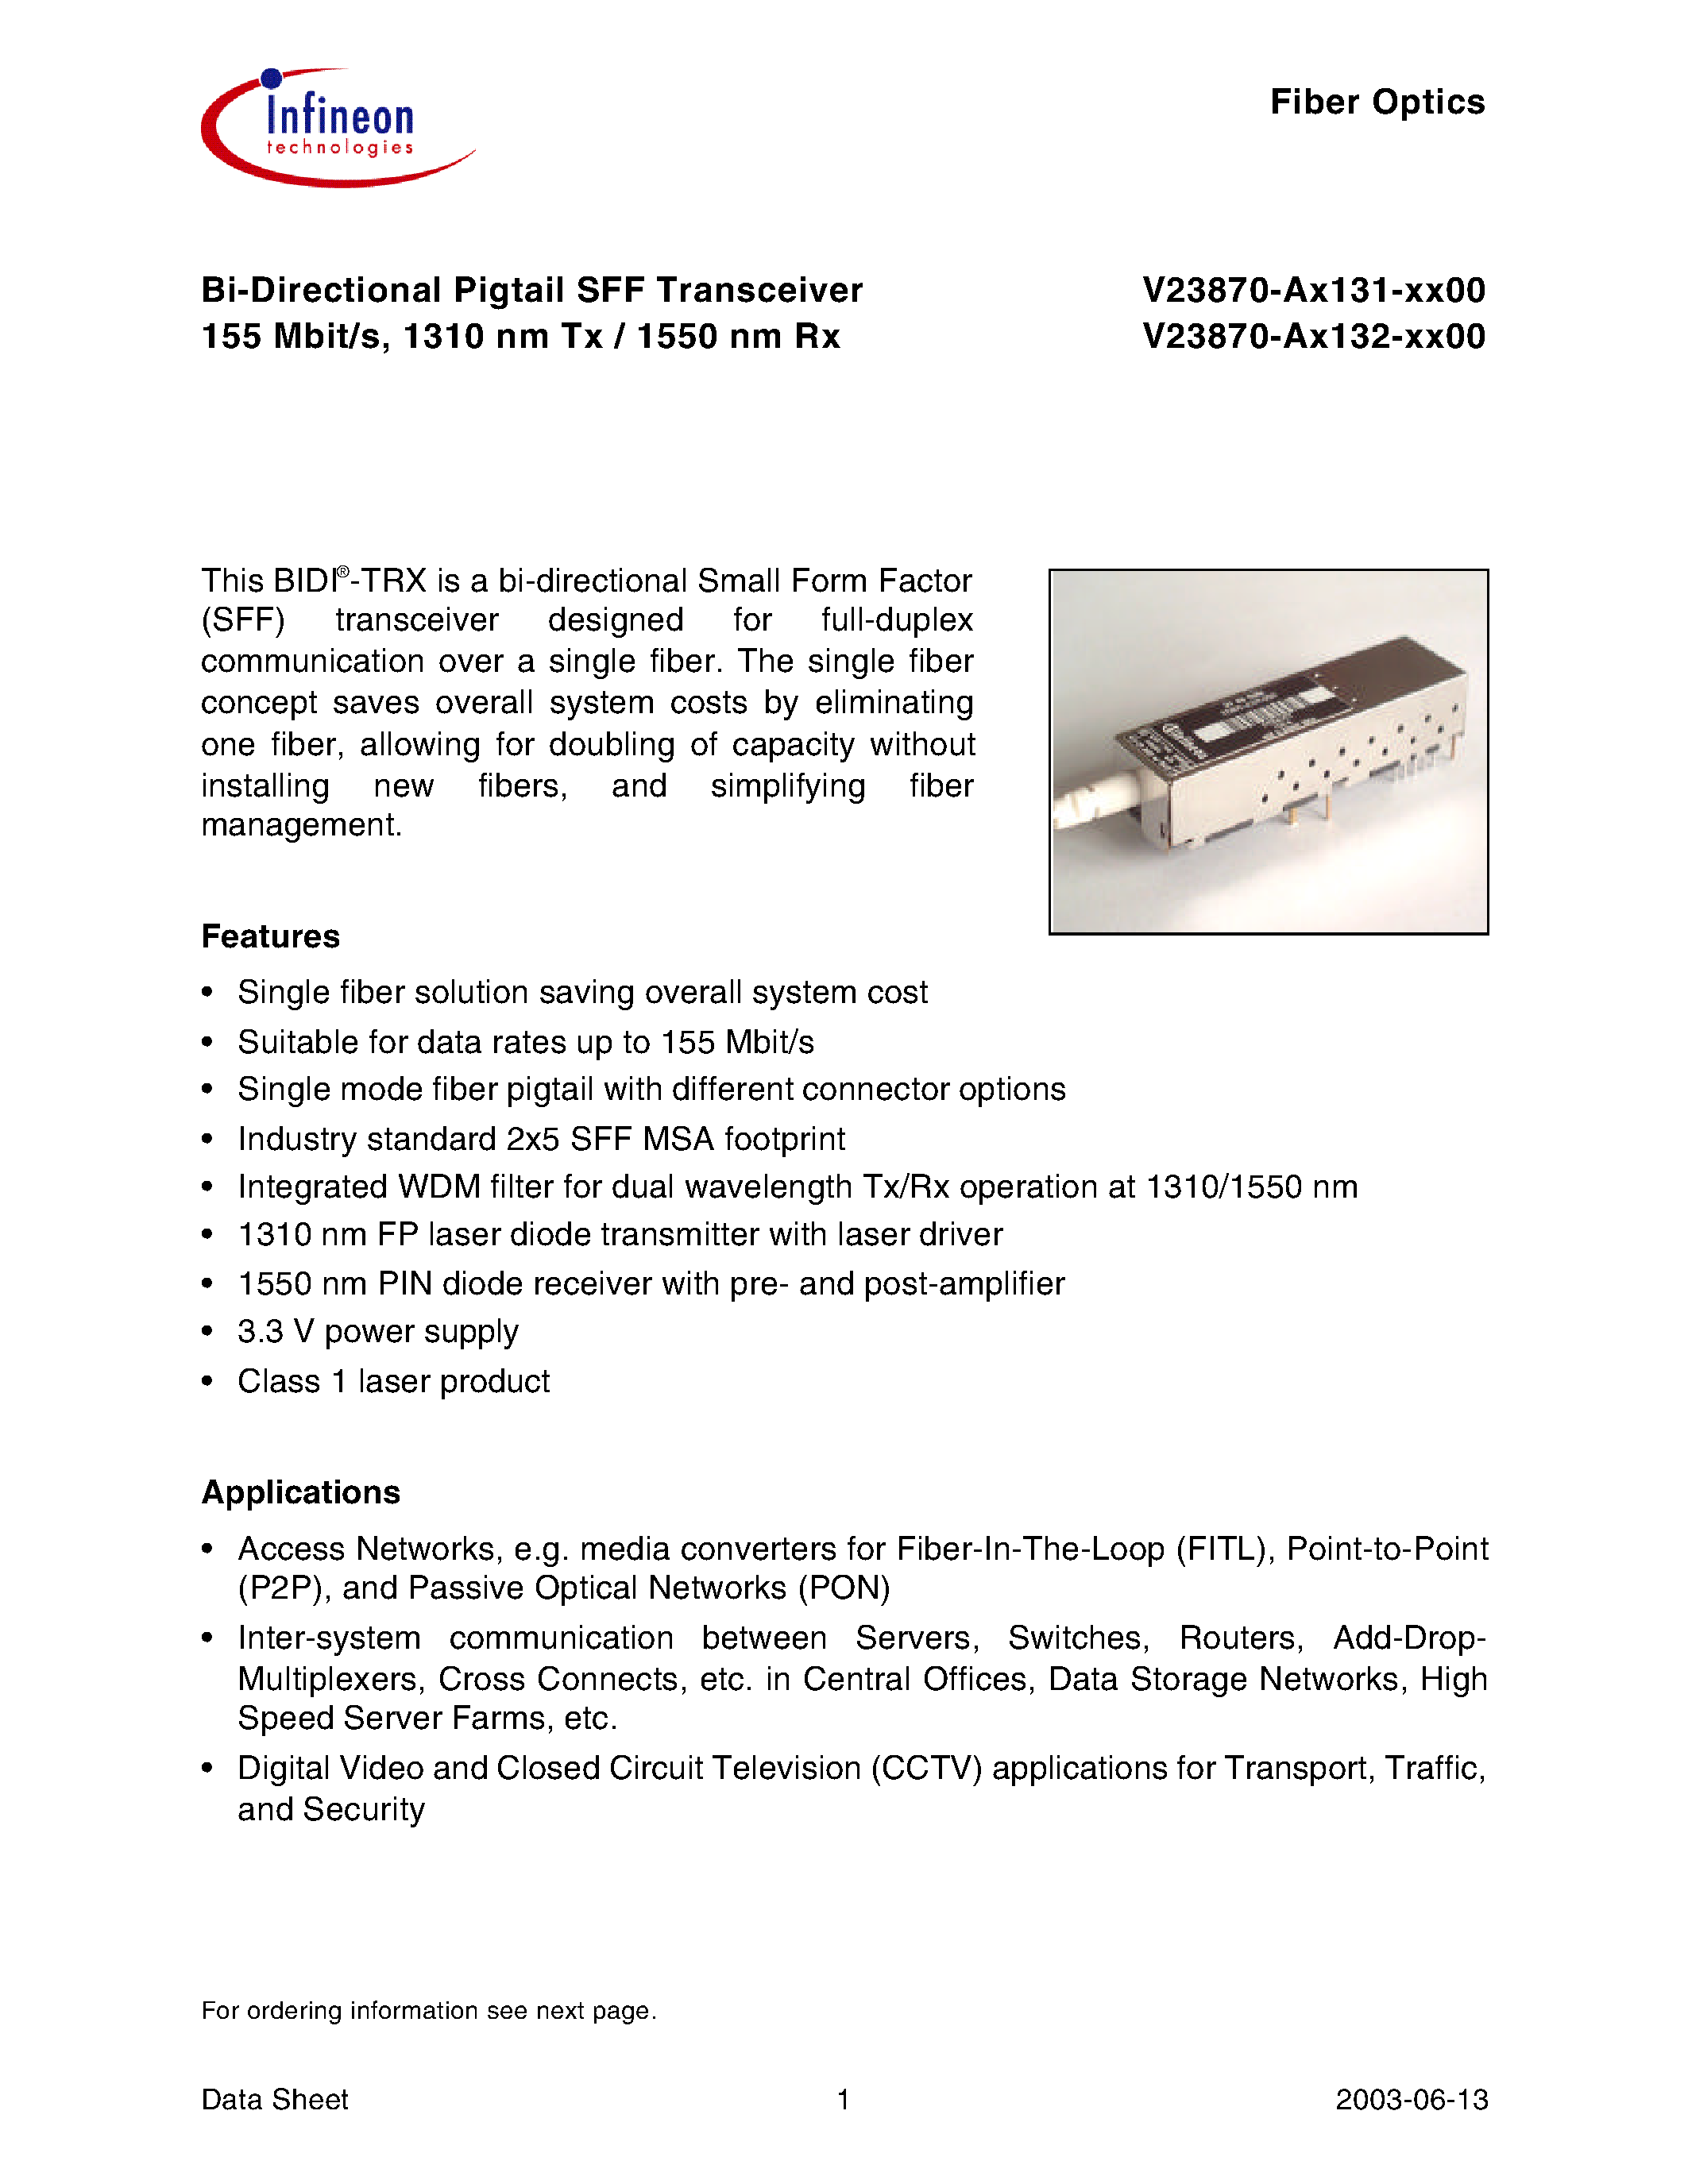 Datasheet V23870-A1132-B500 - Bi-Directional Pigtail SFF Transceiver 155 Mbit/s/ 1310 nm Tx / 1550 nm Rx page 1